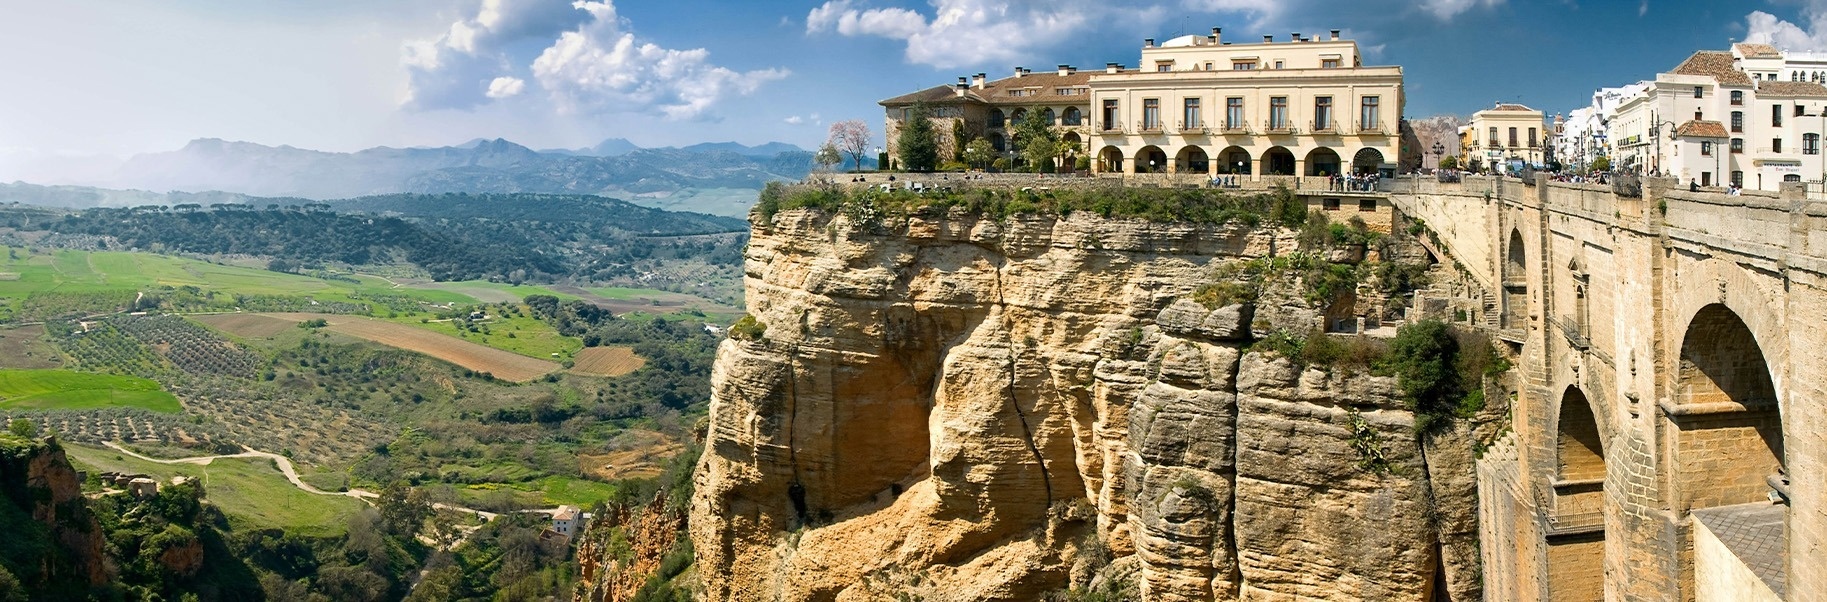 a large building sits on top of a cliff overlooking a valley